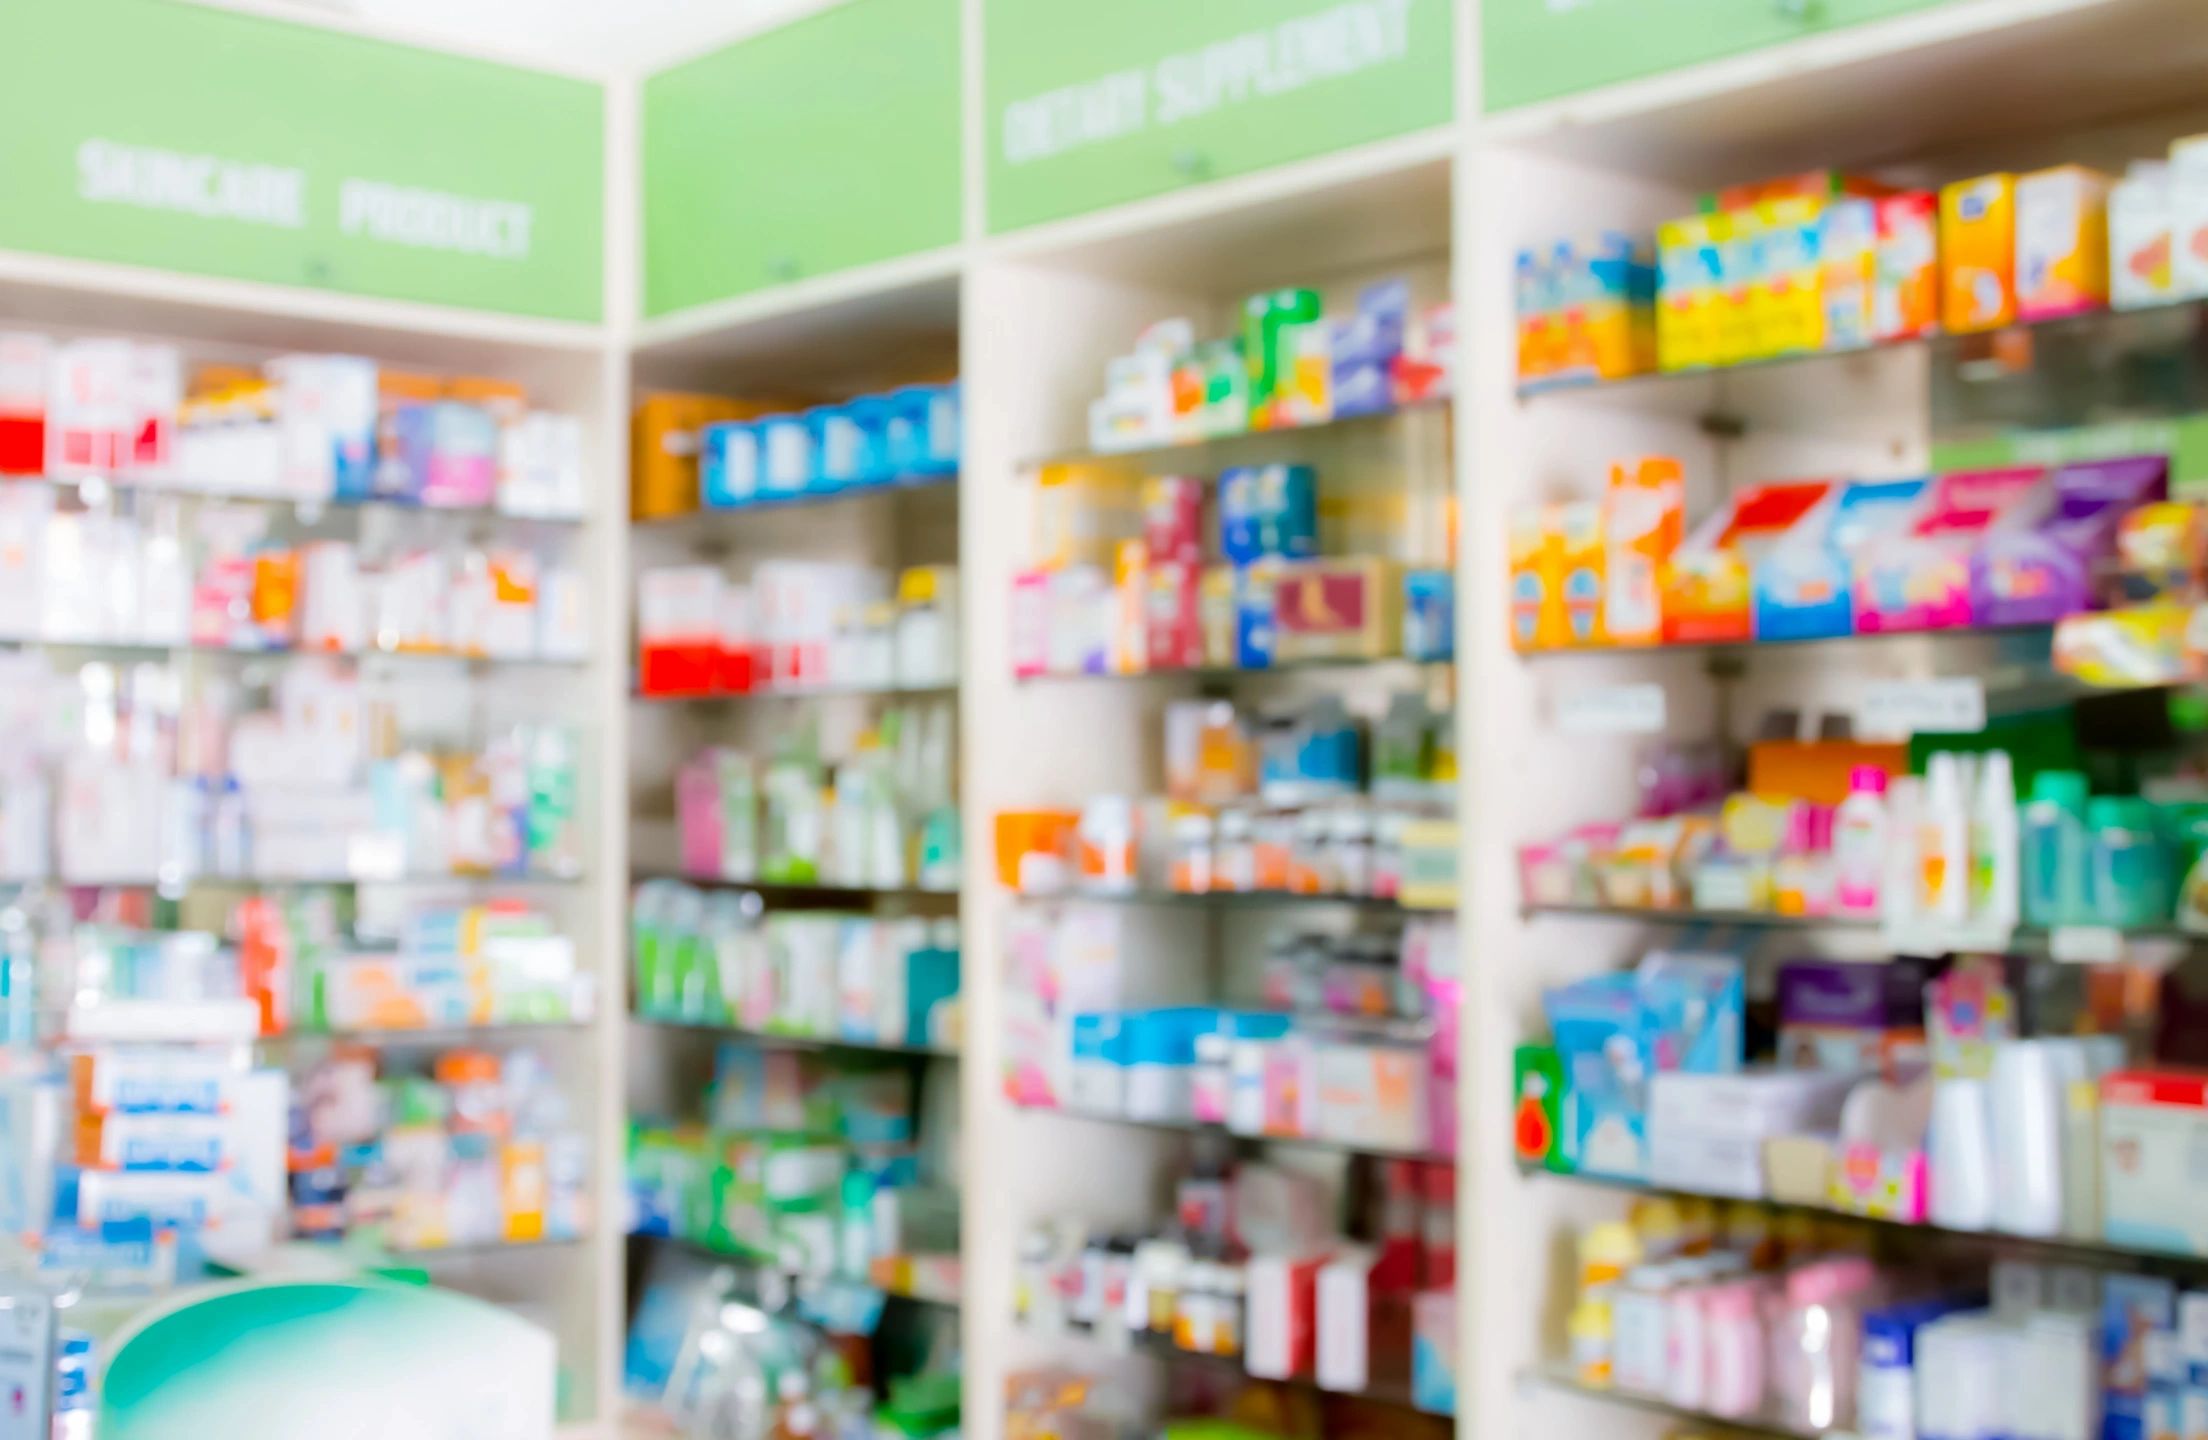 15 Pharmacy Items Every Woman Needs To Survive The Midlife Years